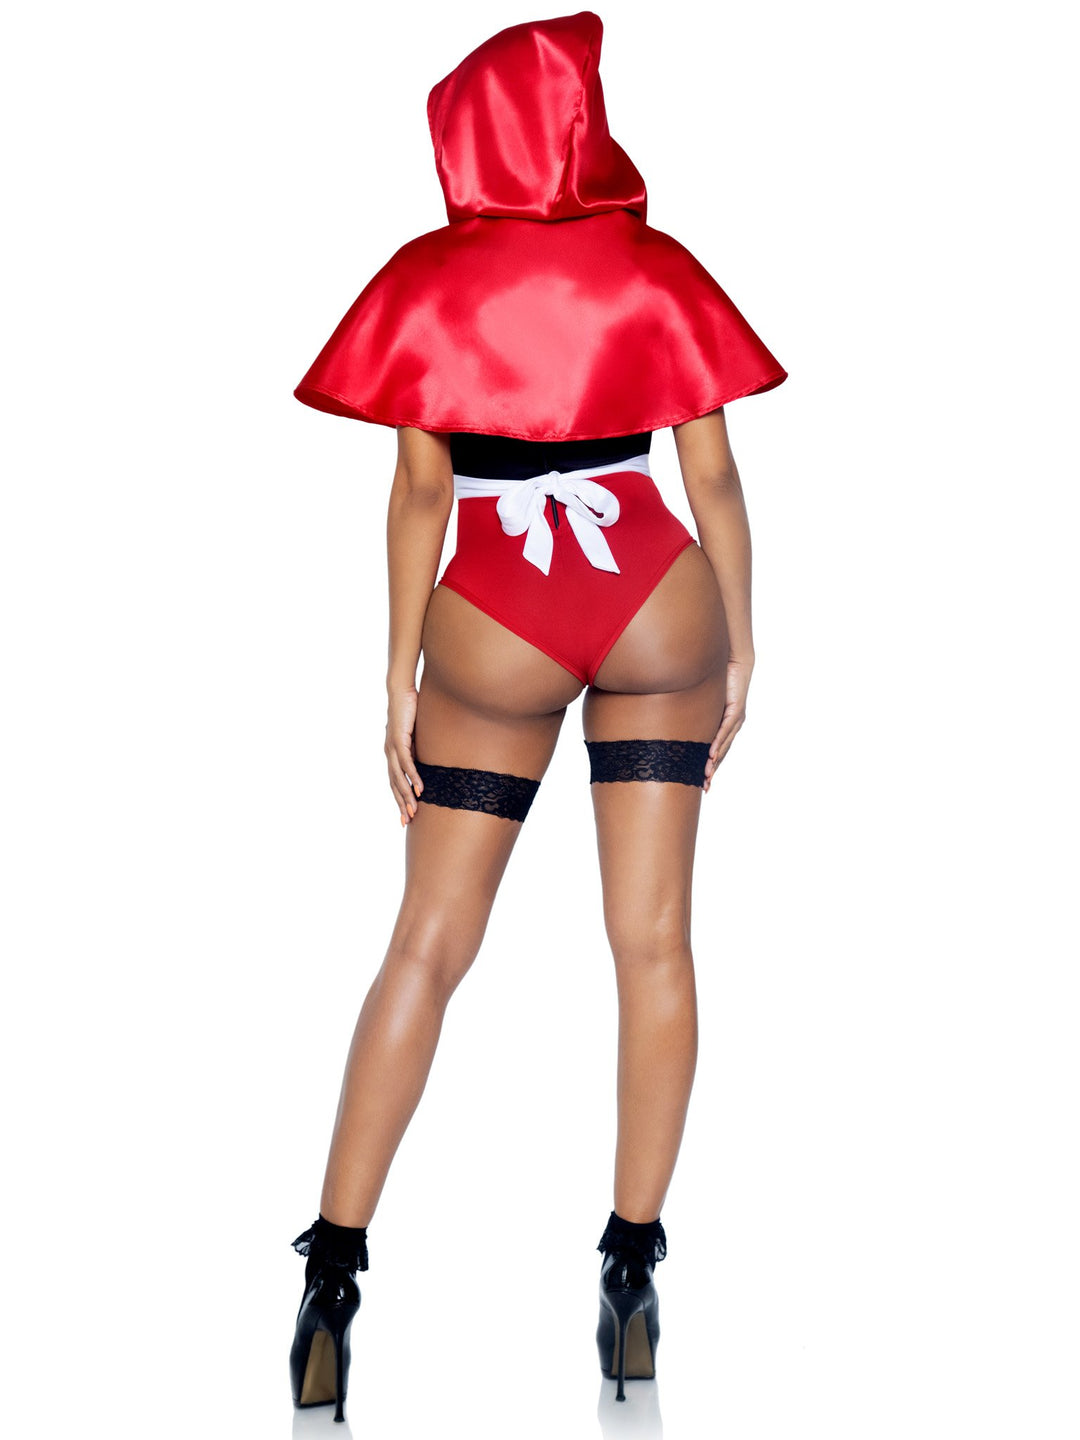 Sexy Red Riding Hood Lacy Garter Bodysuit with Hooded Cape and Apron